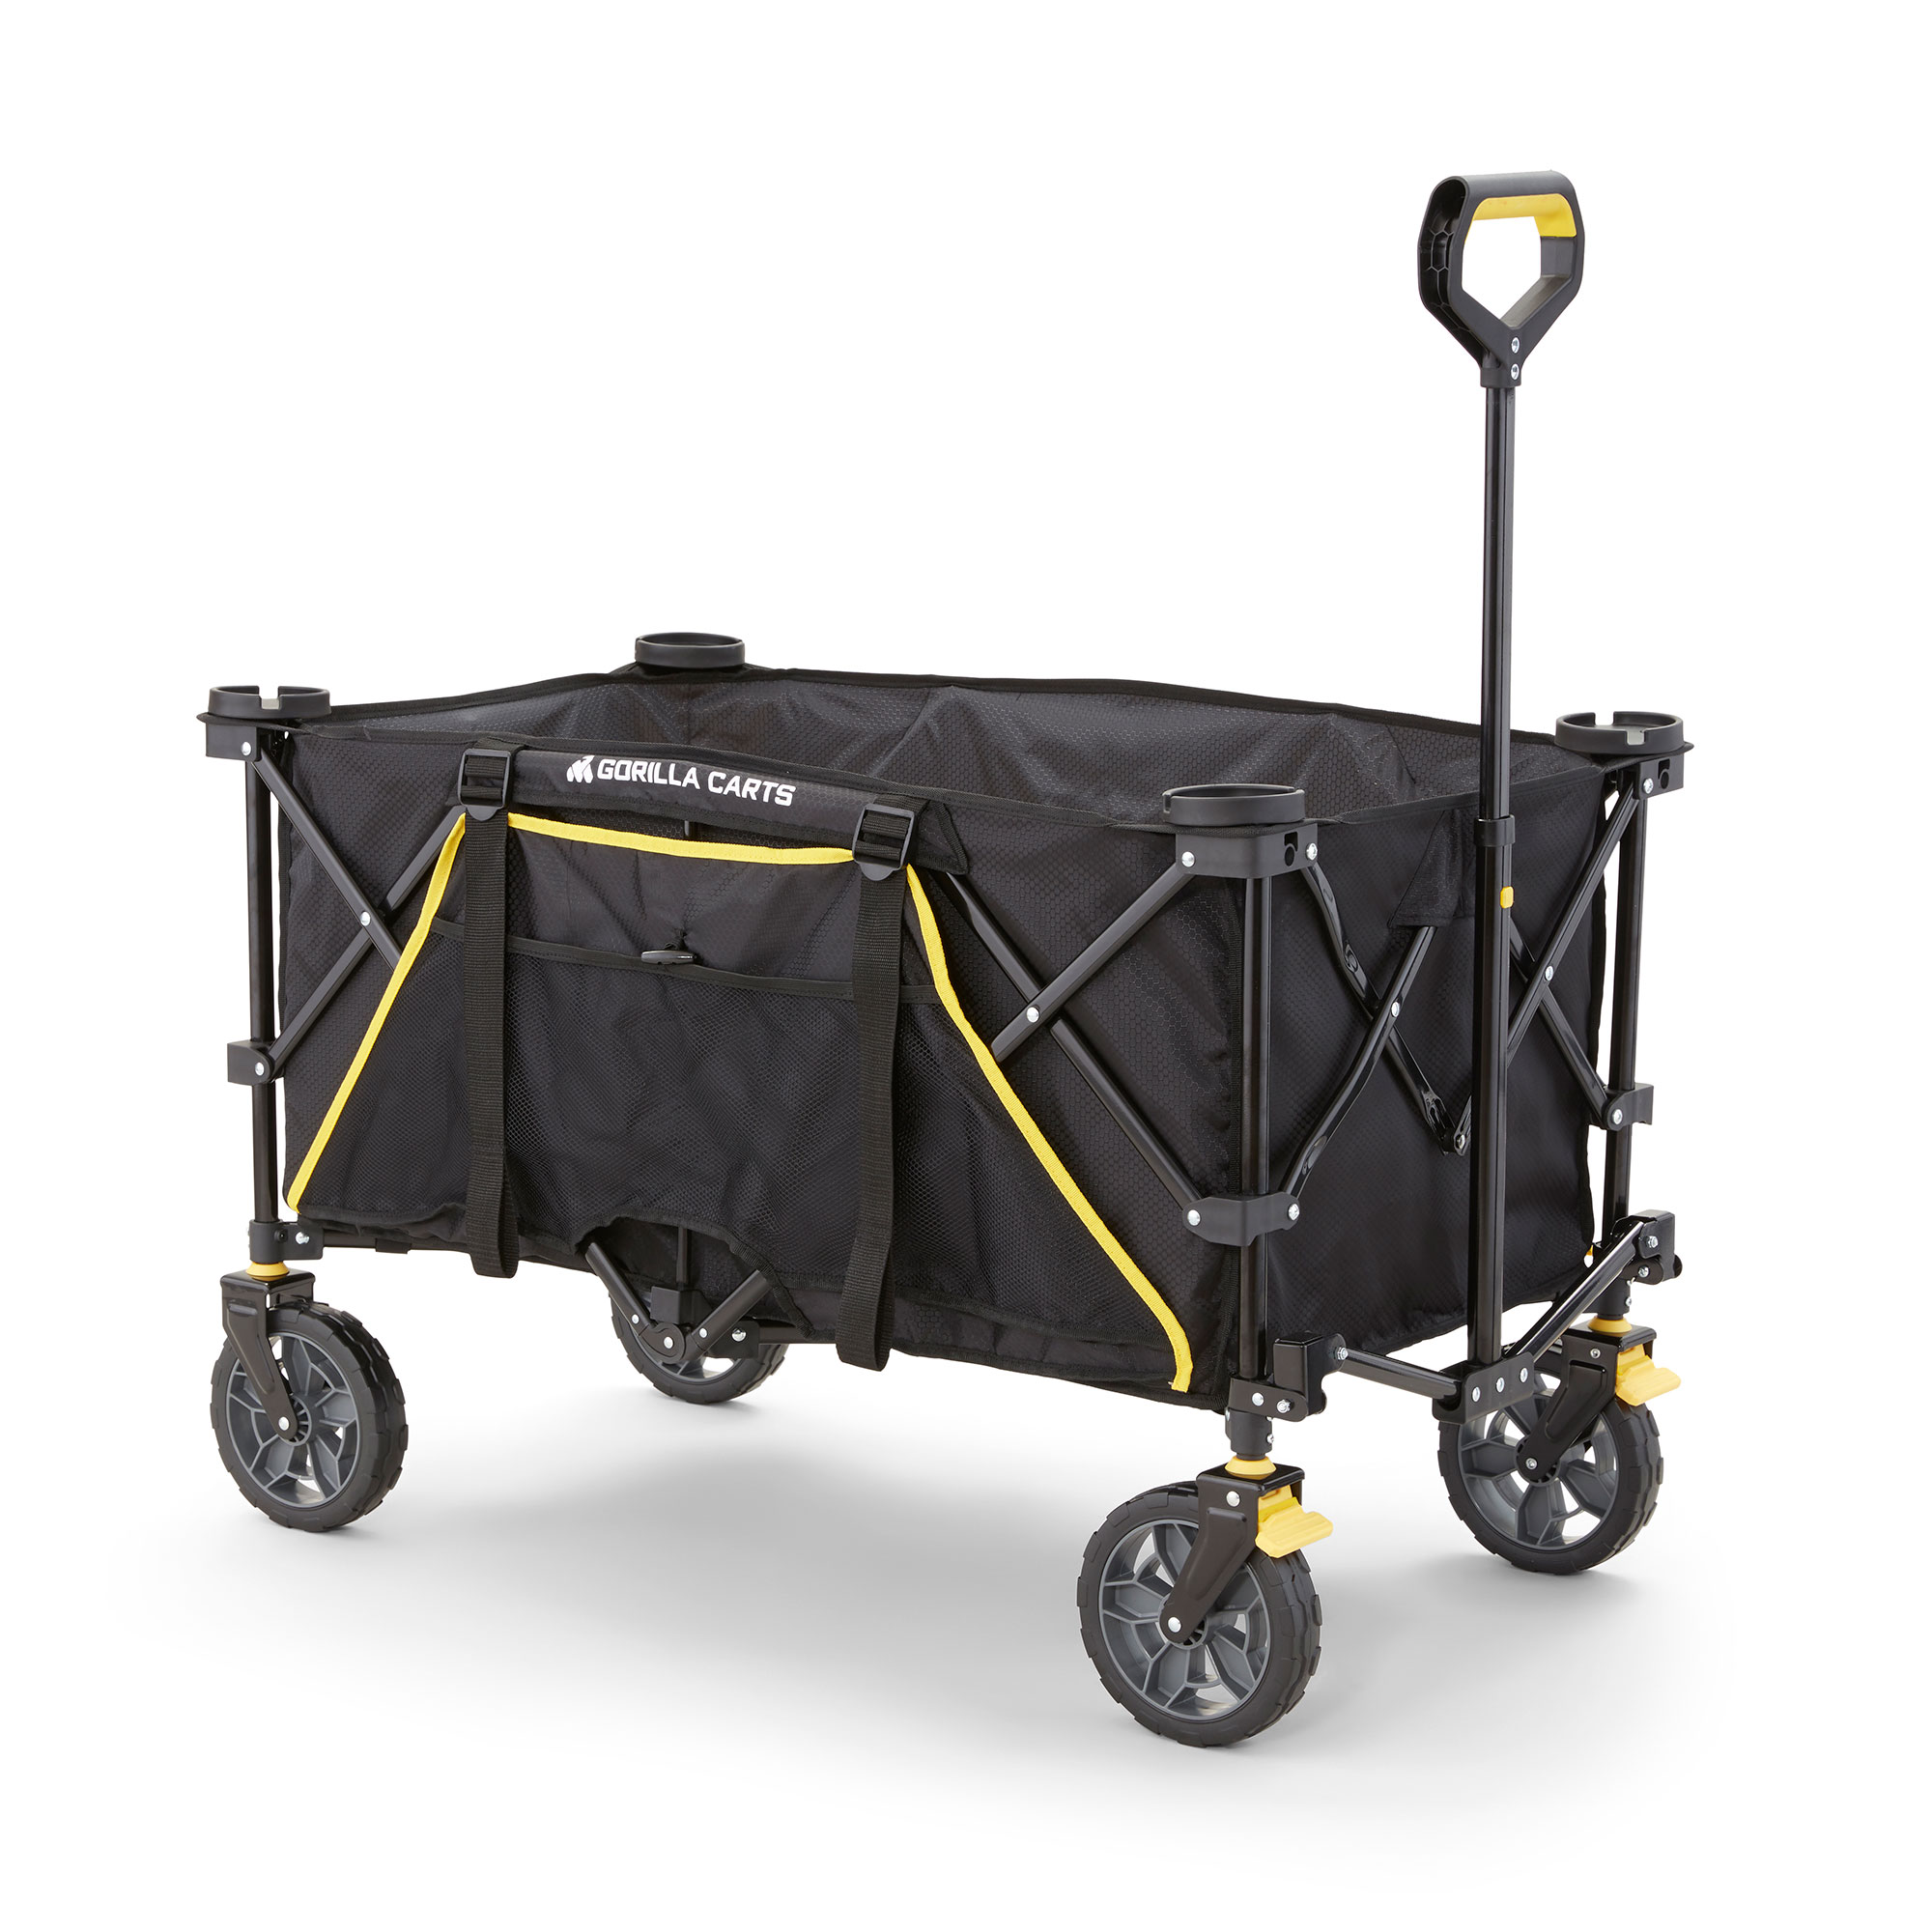 Gorilla Carts 7 Cu Ft Collapsible Outdoor Utility Wagon,Oversize Bed, Black - image 1 of 11